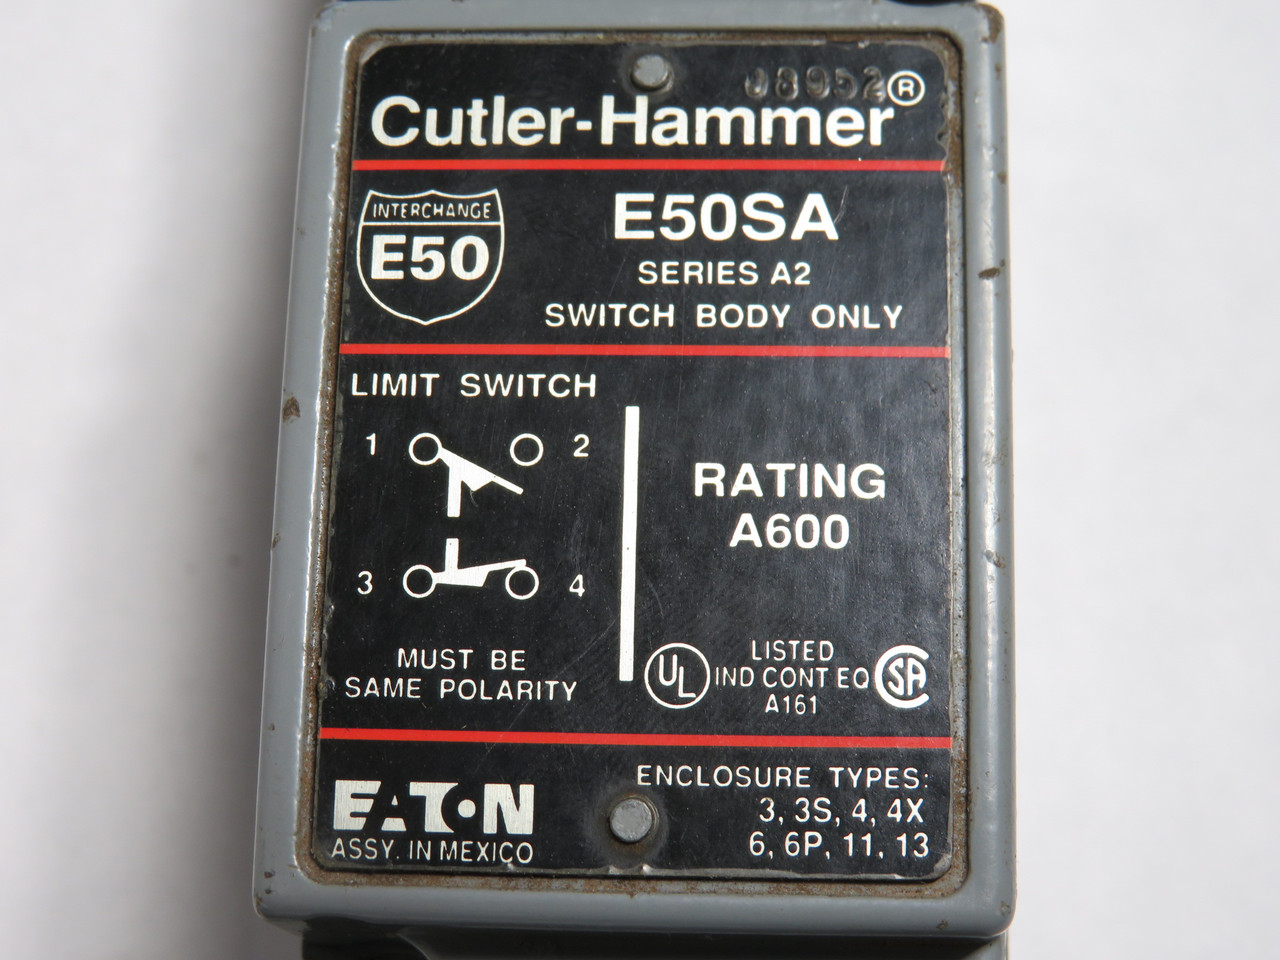 Cutler-Hammer E50SA Series A2 Limit Switch C/W E50DR1 Head COSMETIC DAMAGE USED